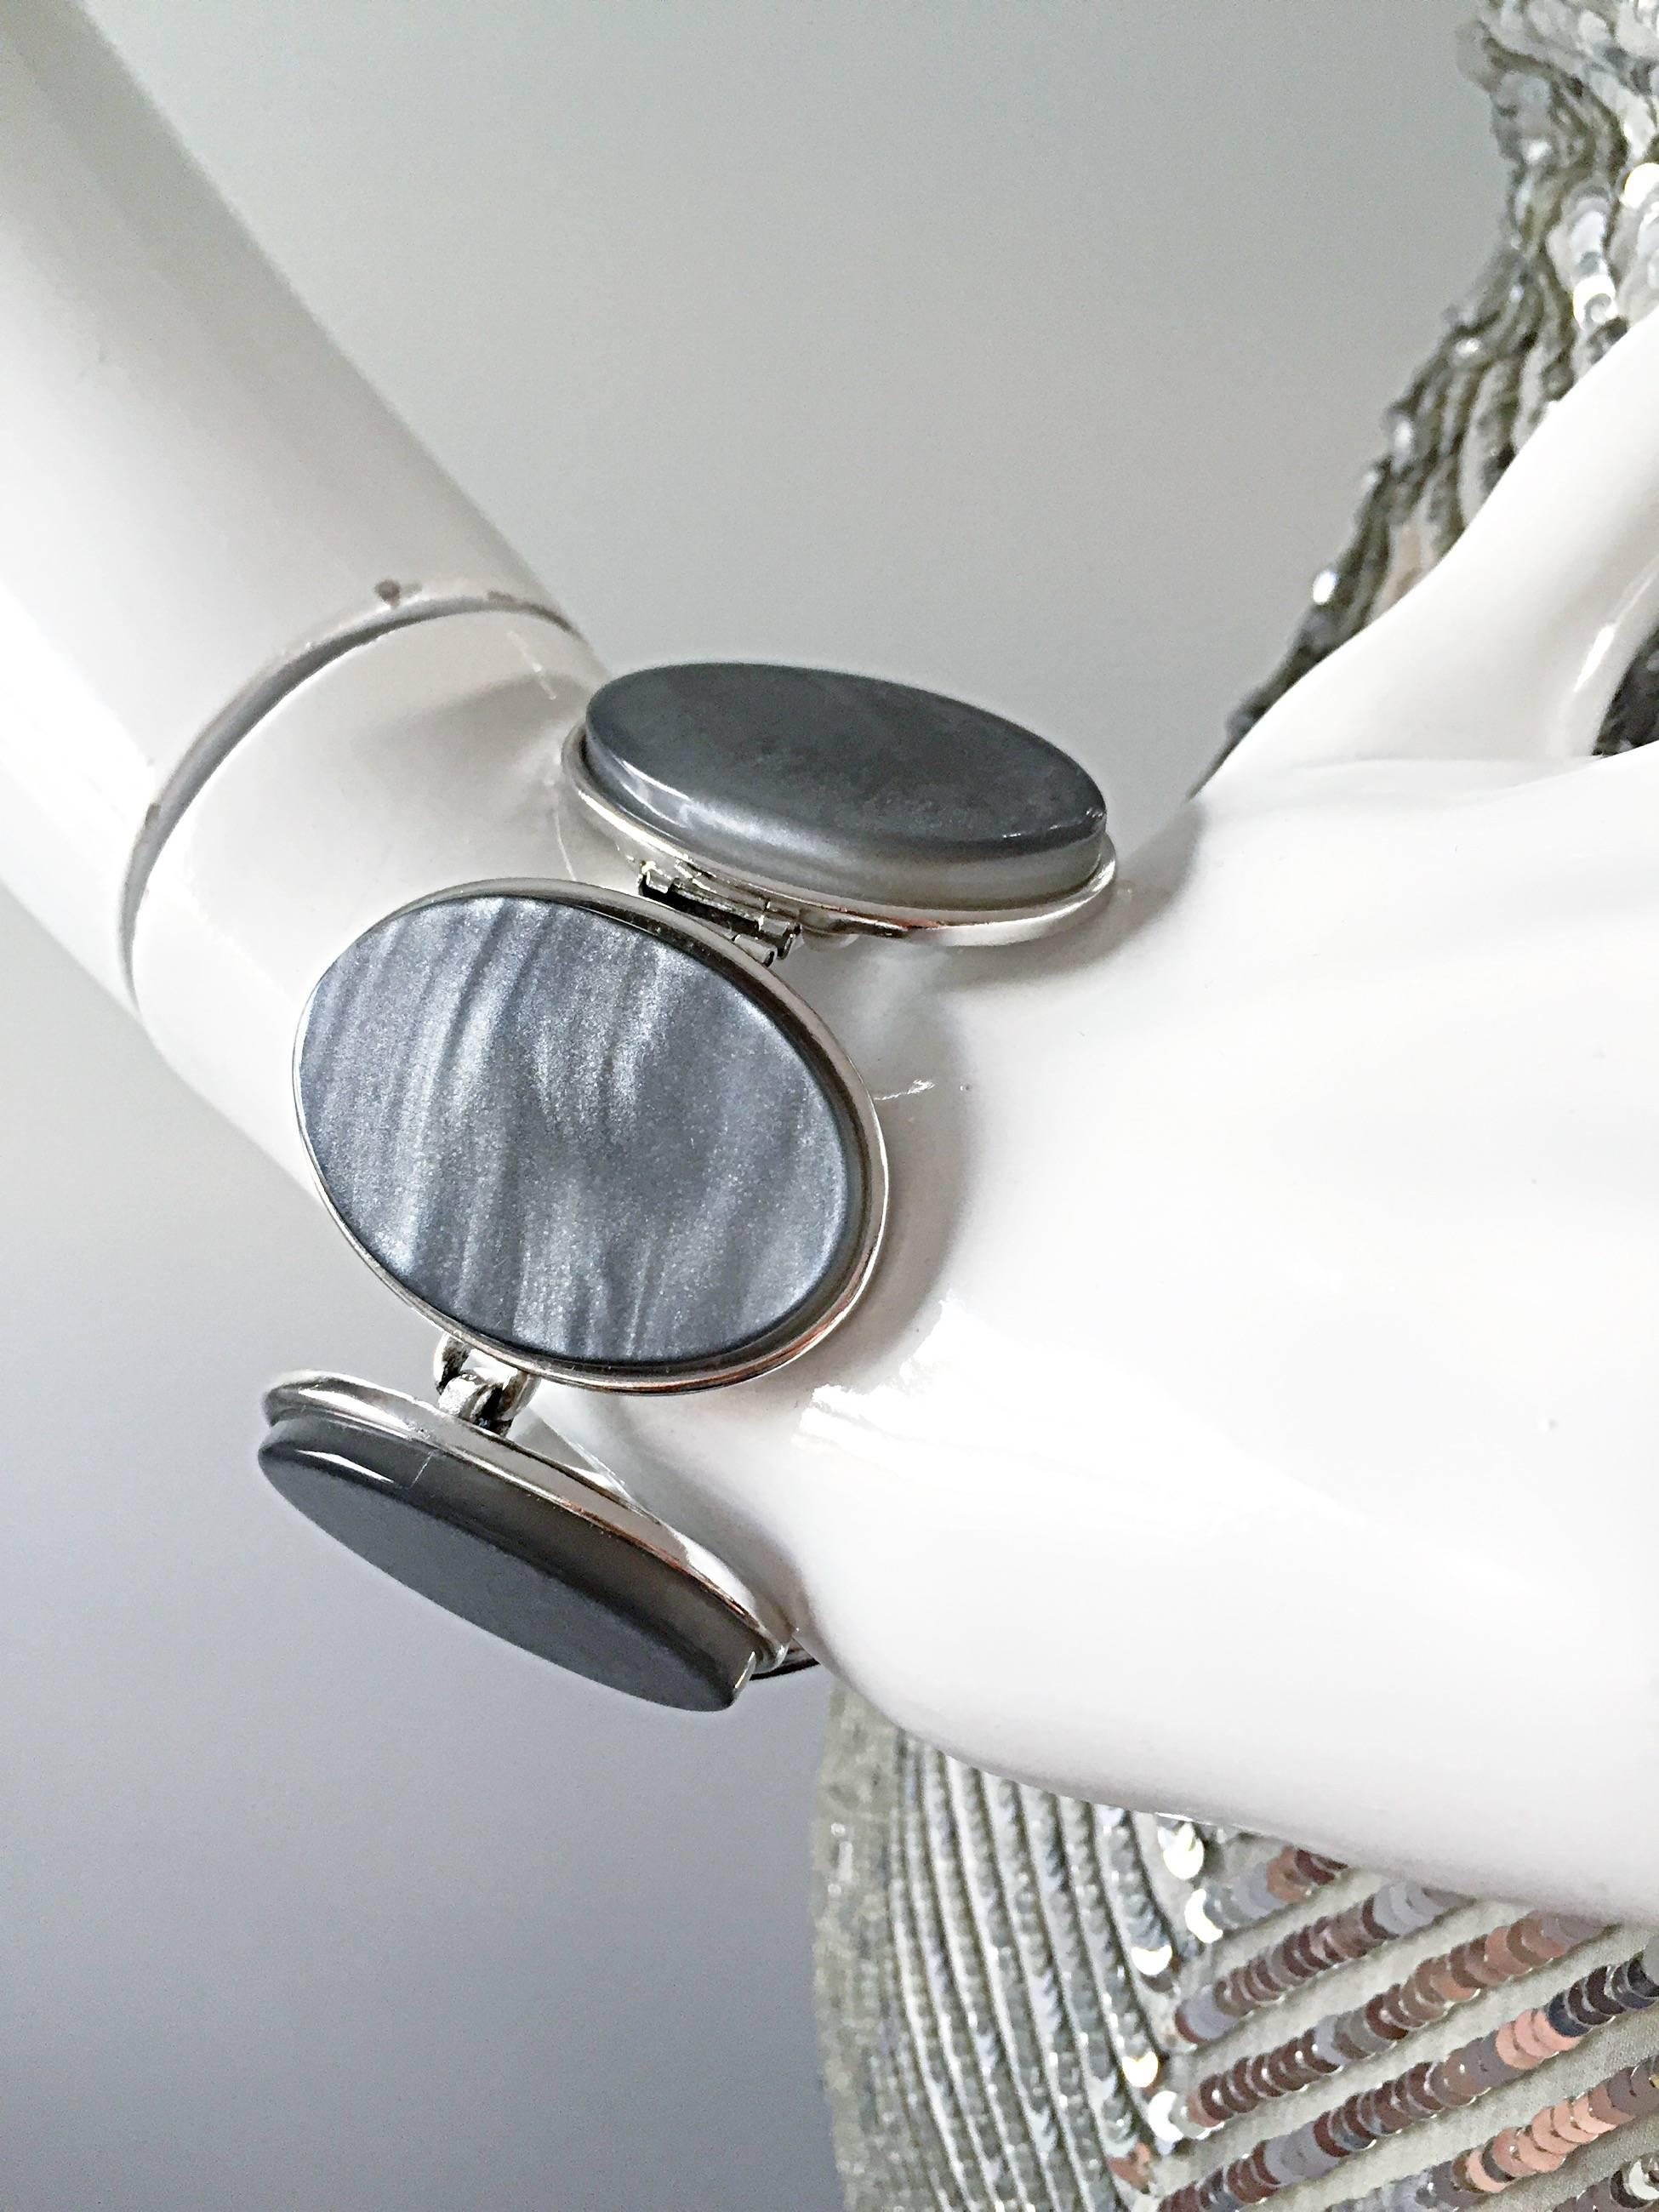 Beautiful vintage YVES SAINT LAURENT silver/grey iridescent oval bracelet! Each oval varies with pattern, and gives so much to any outfit! Six ovals on silver links. In great unworn condition. Made in France. Measures 8 inches long.